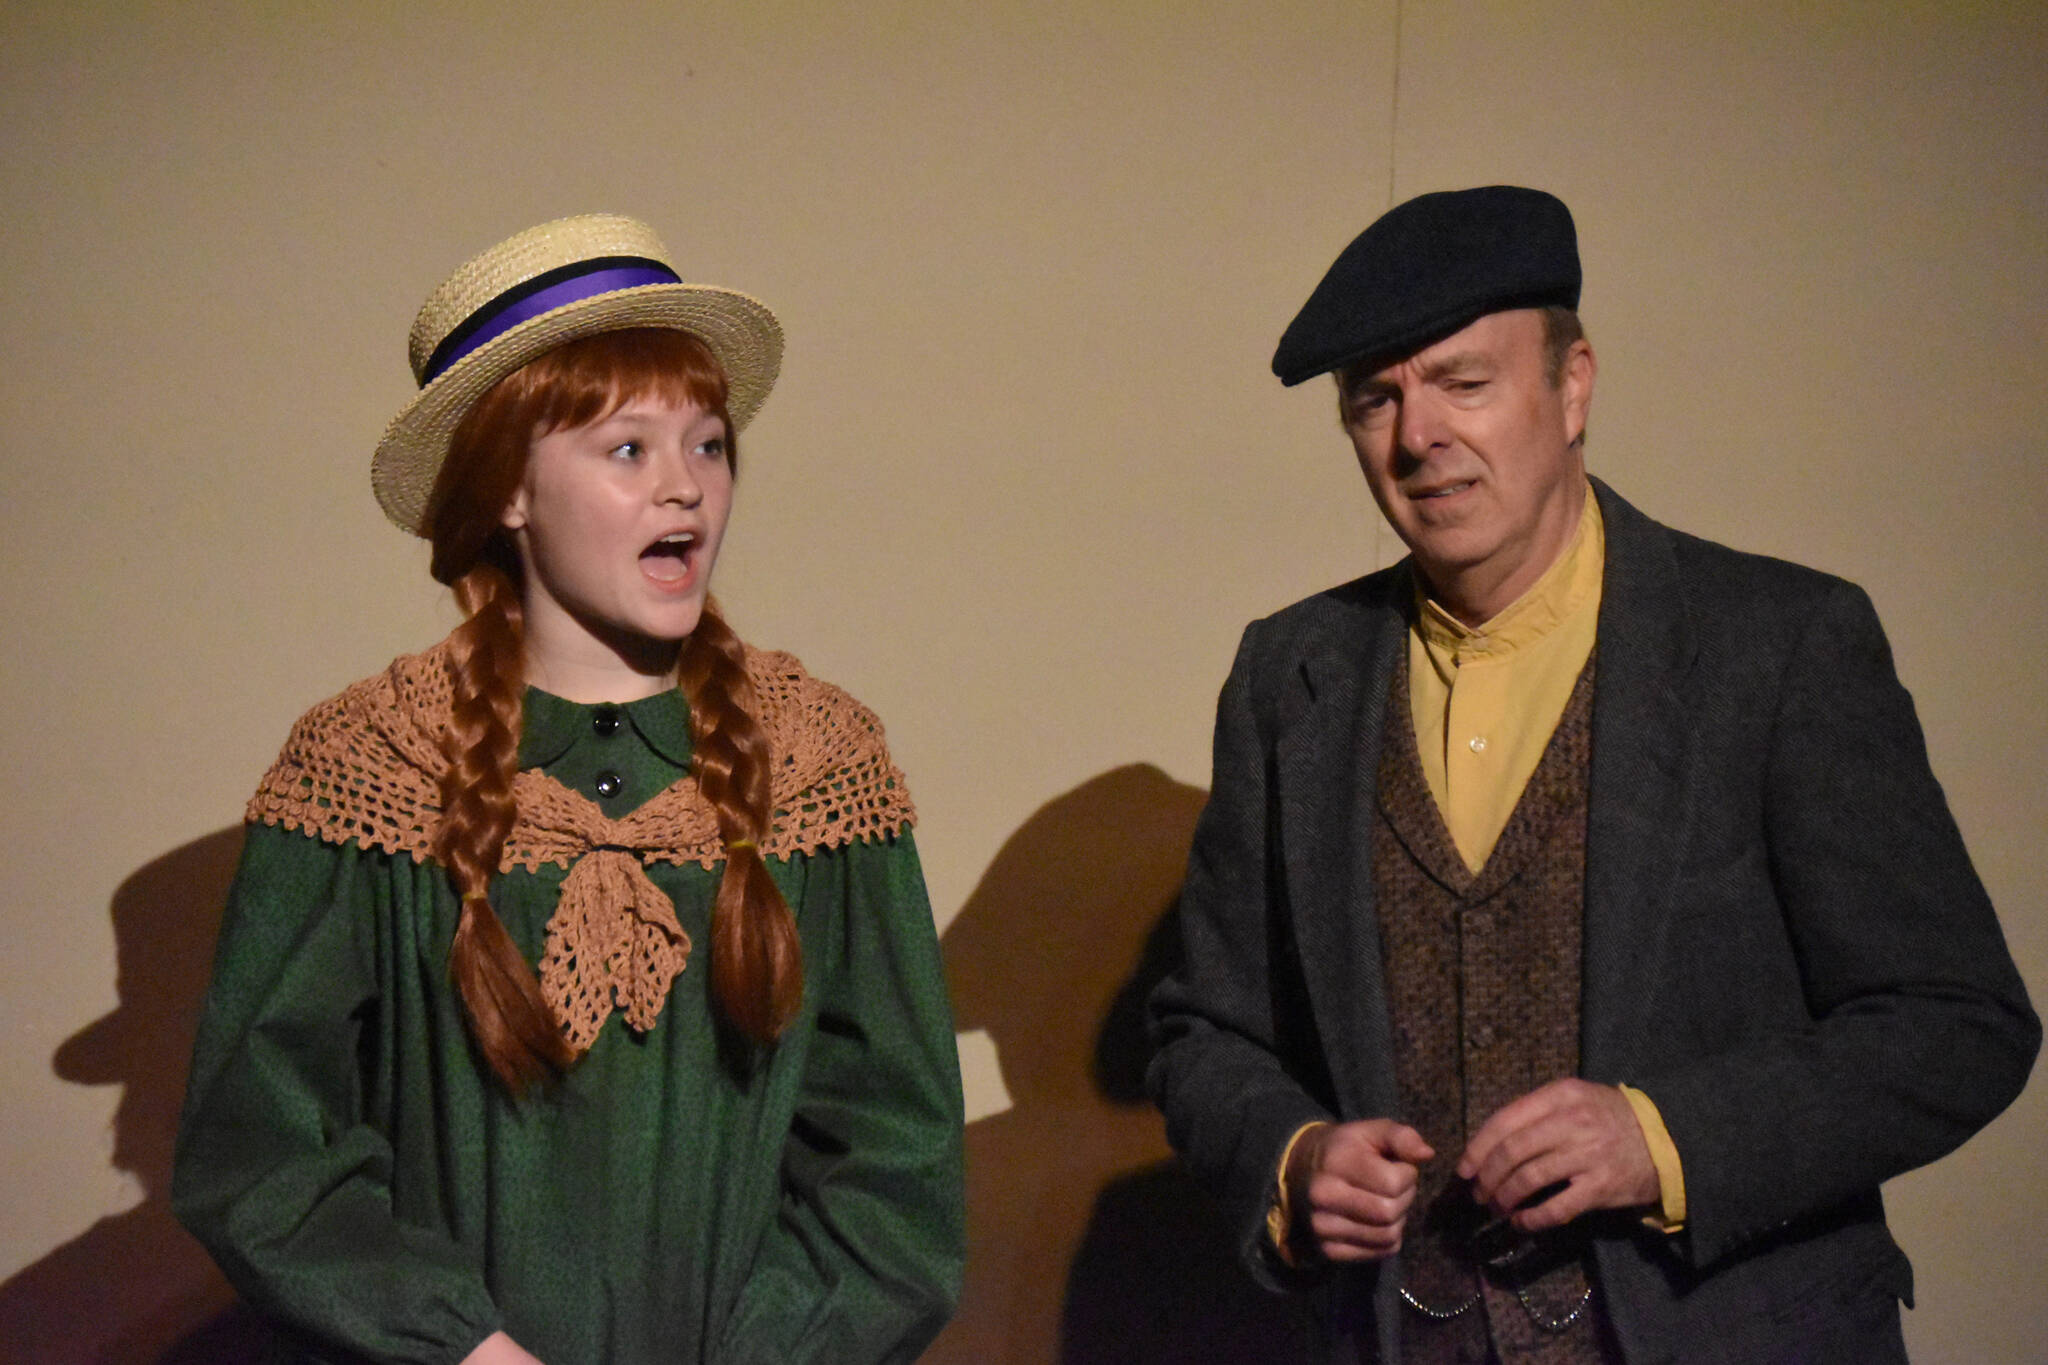 Truly Hondel portrays Anne Shirley and Todd Sherwood portrays Matthew Cuthbert in a rehearsal of “Anne of Green Gables” at the Kenai Performers Black Box Theatre in Soldotna, Alaska, on Tuesday, Nov. 1, 2022. (Jake Dye/Peninsula Clarion)